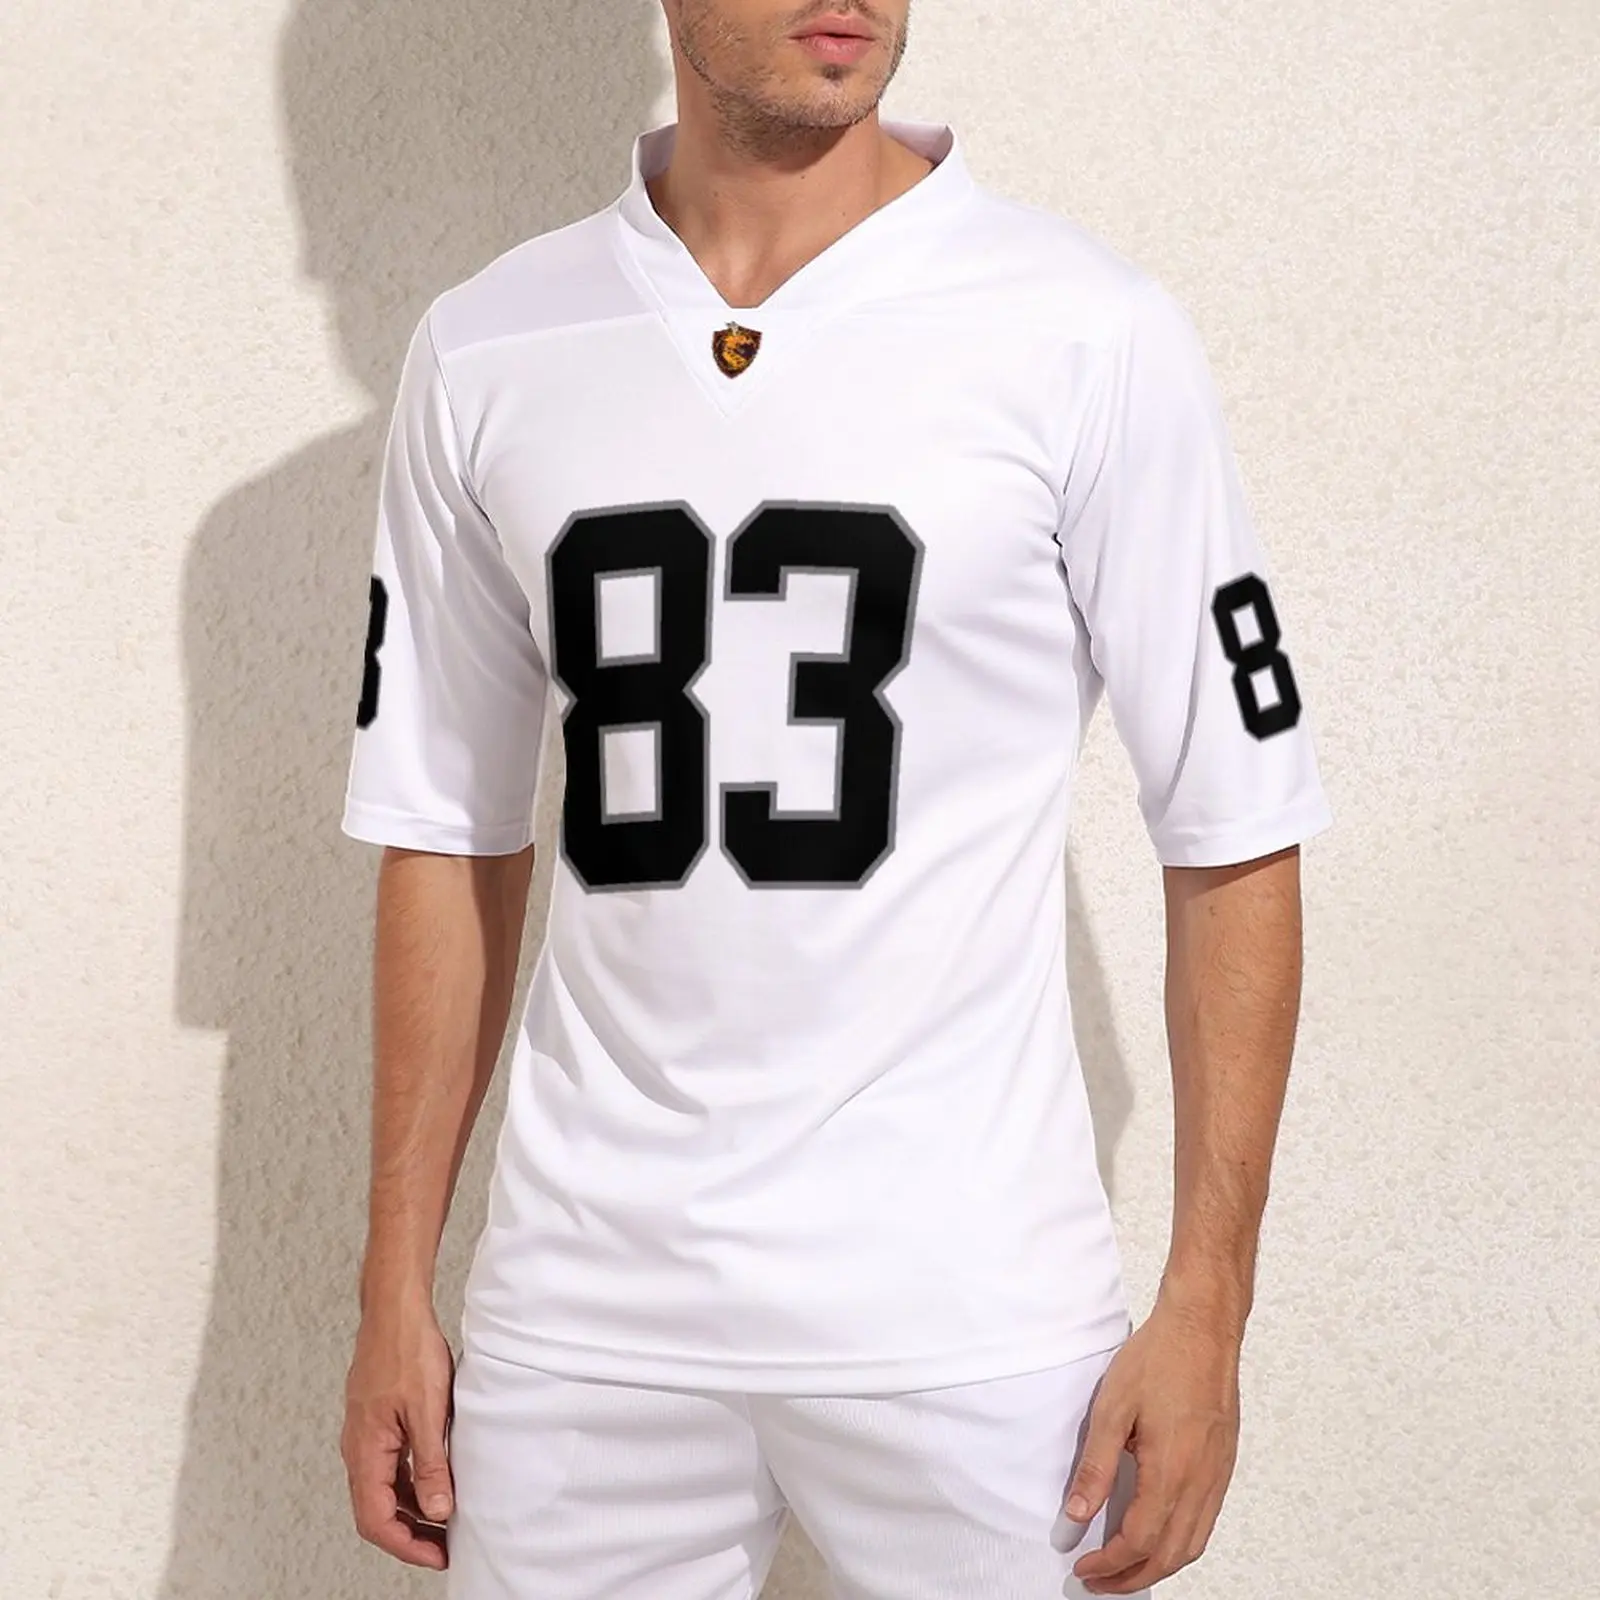 

Custom Made Las Vegas No 83 White Football Jerseys For Male Stylish Rugby Jersey Personalization Training Rugby Shirt